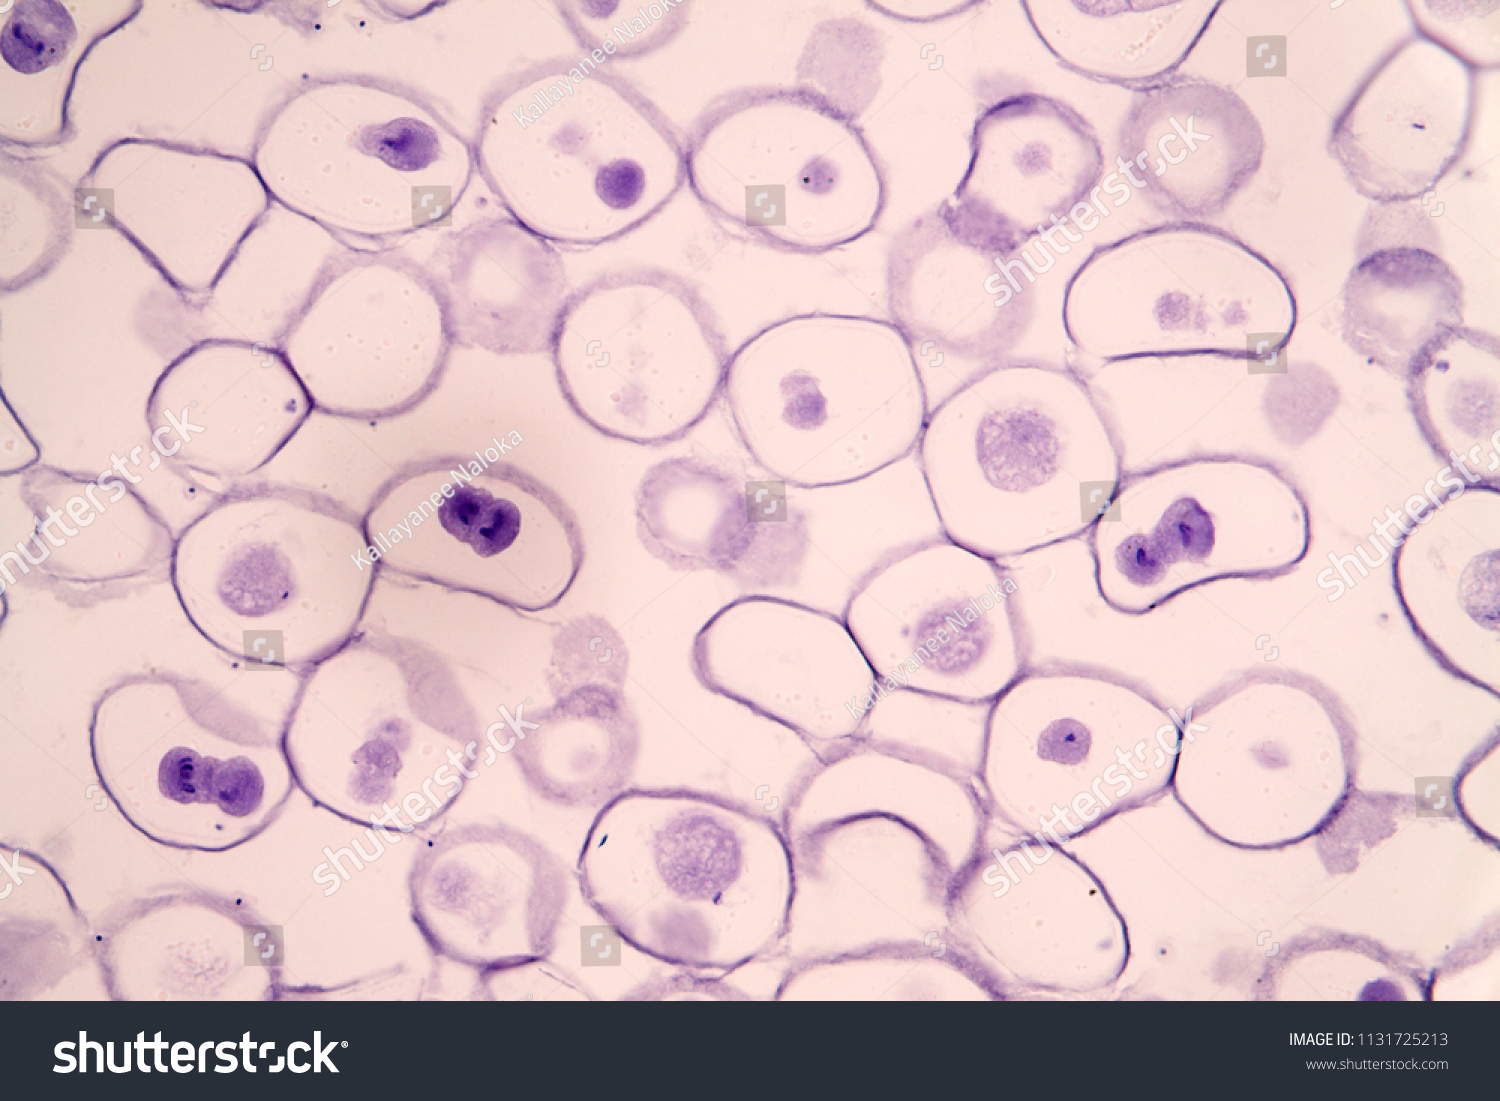 animal cell microscope picture